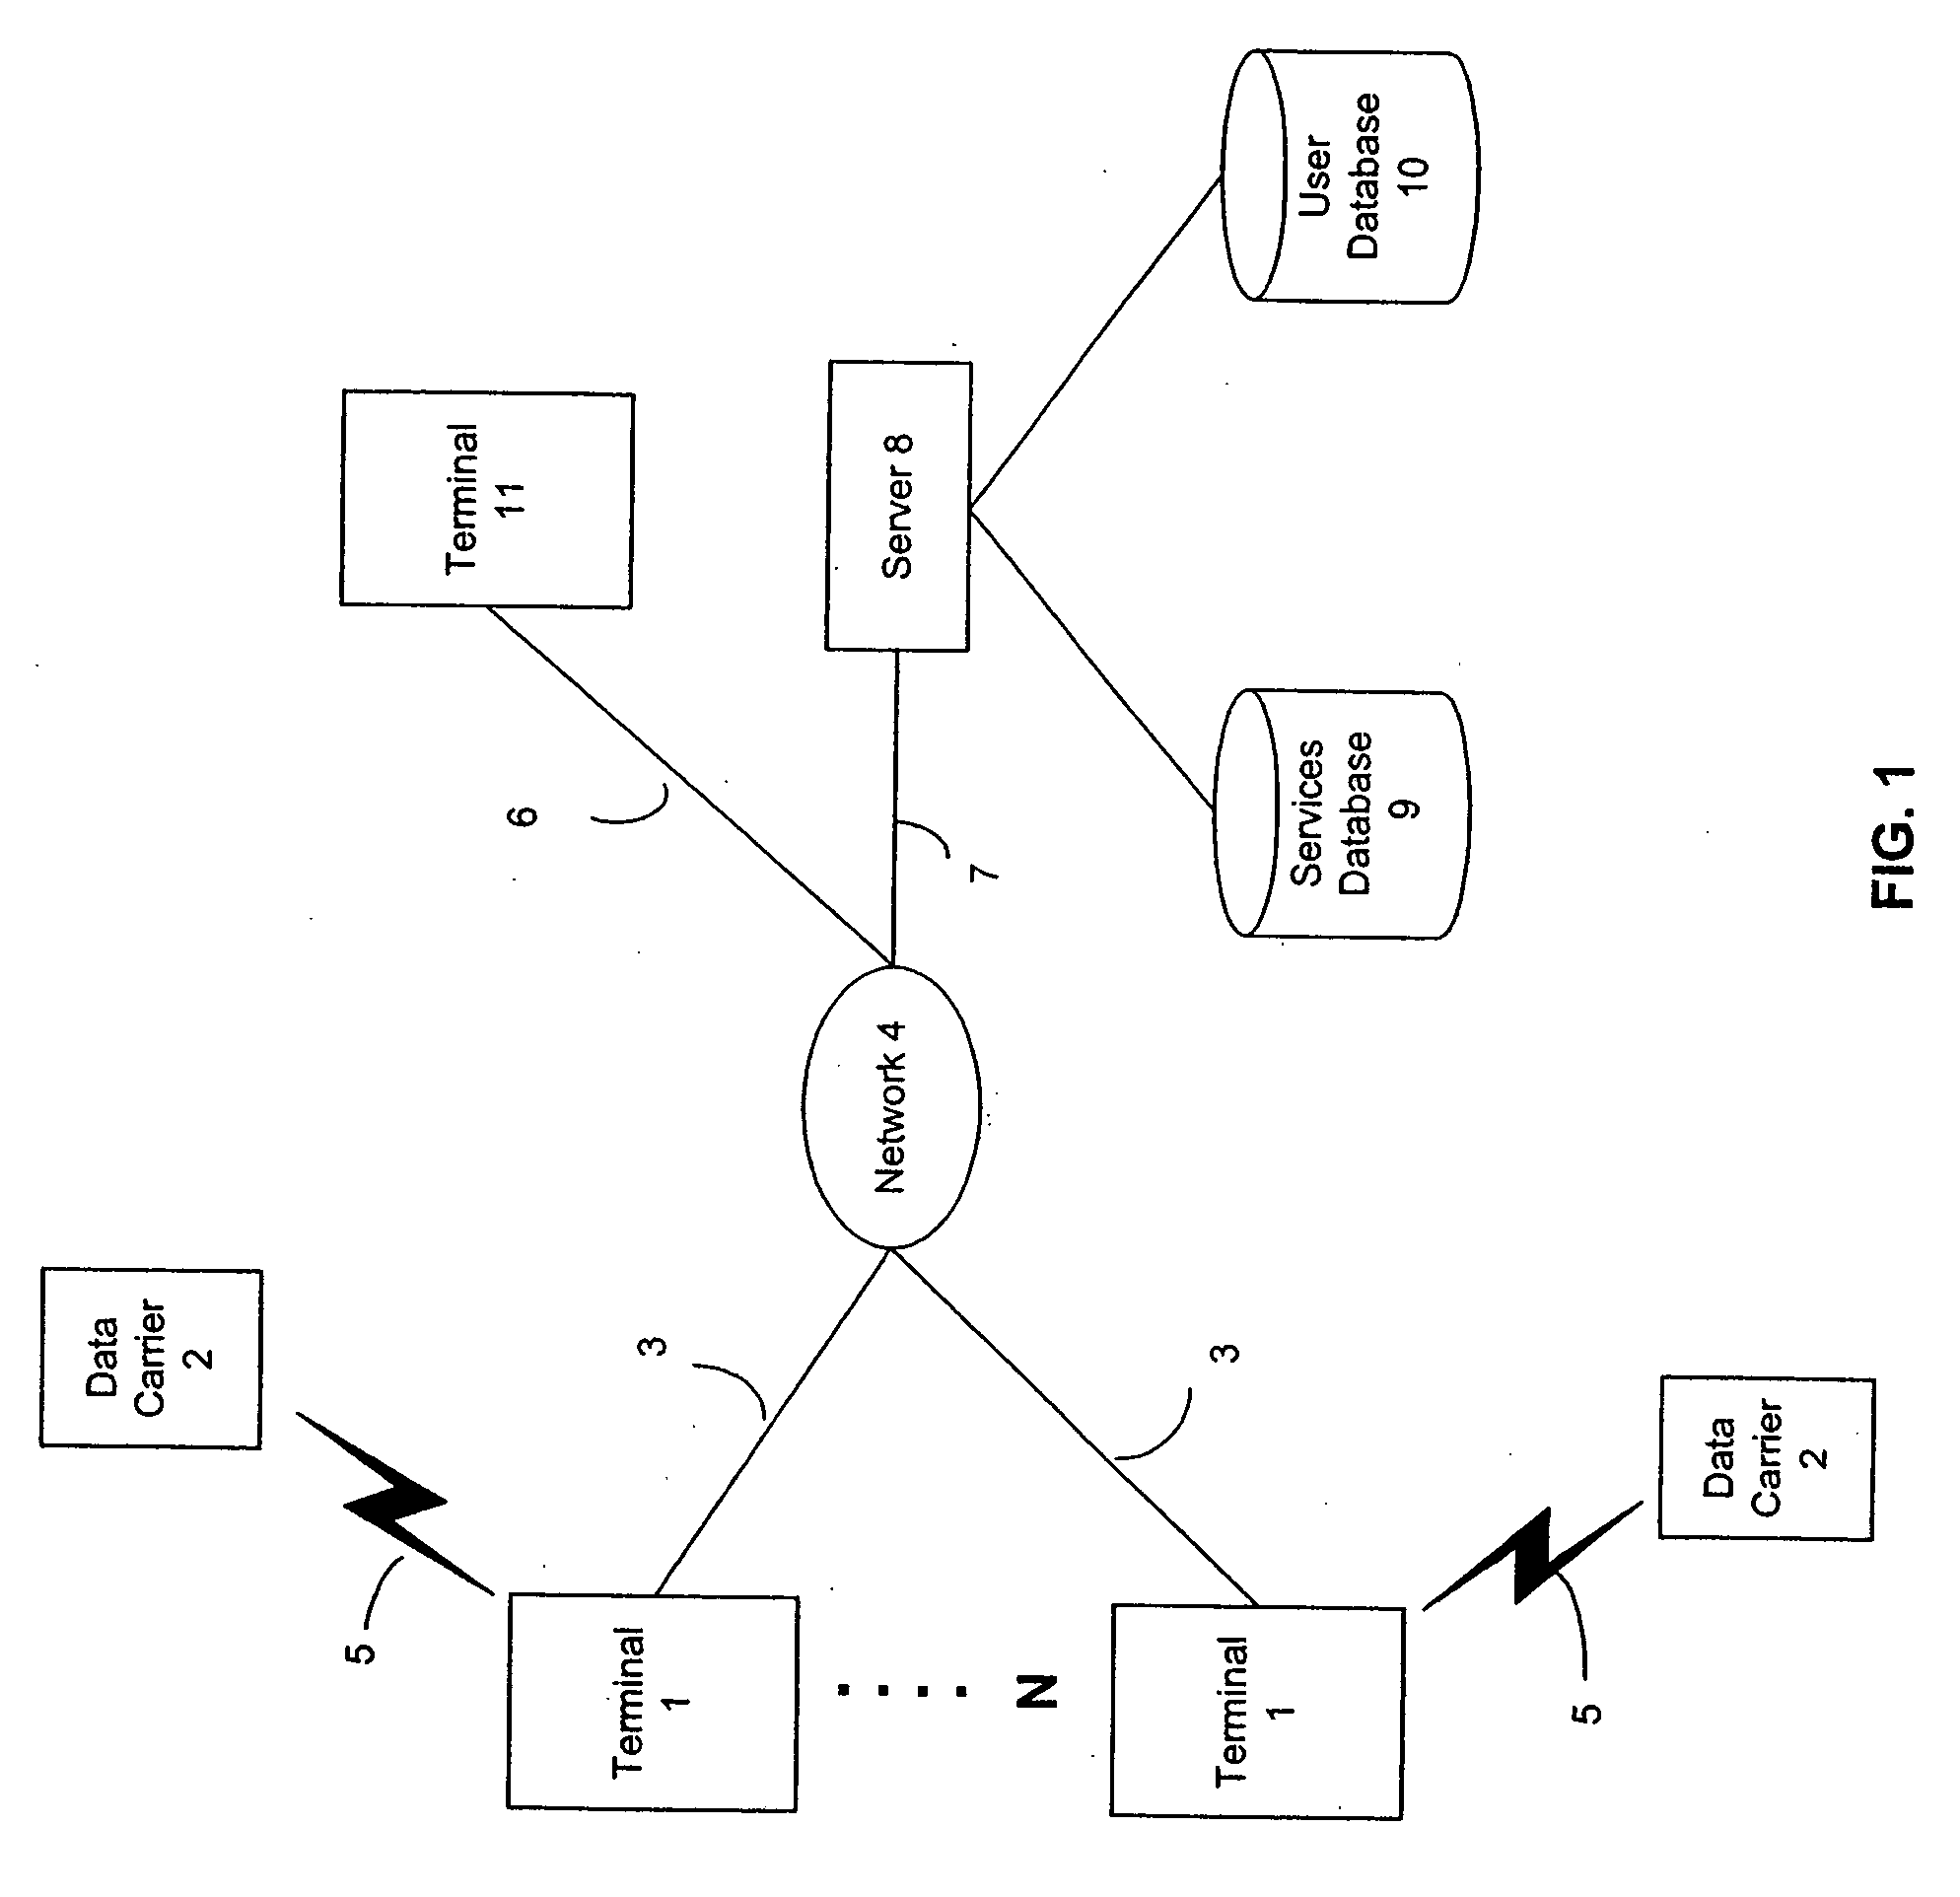 Apparatus, system, method and computer program product for implementing an automatic identification system with a personal communication system to improve functionality